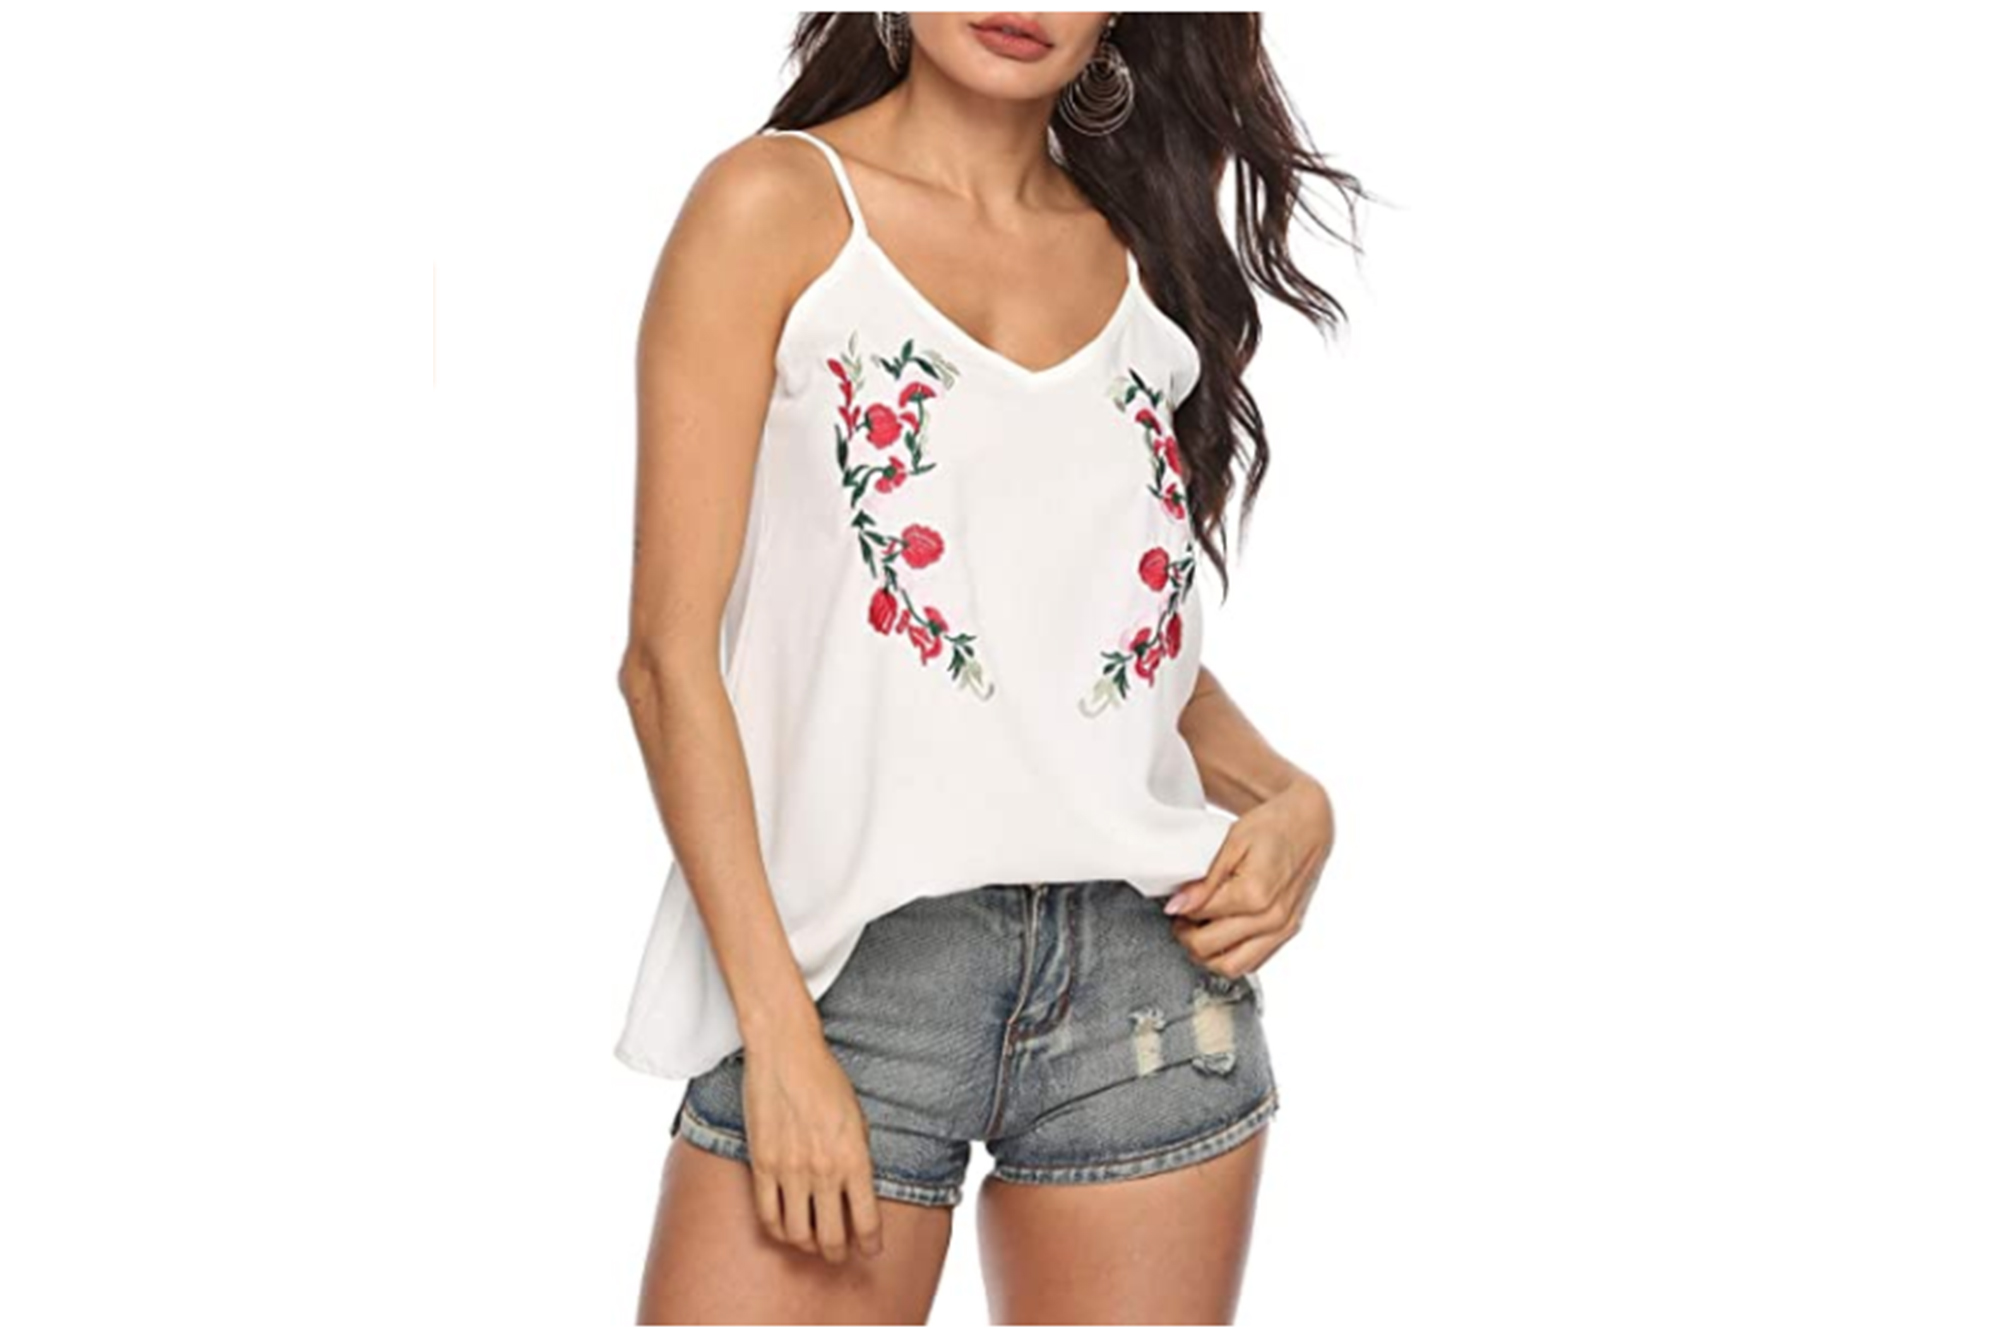 TECREW Embroidered Tank Top Is Giving Us Such Boho Vibes